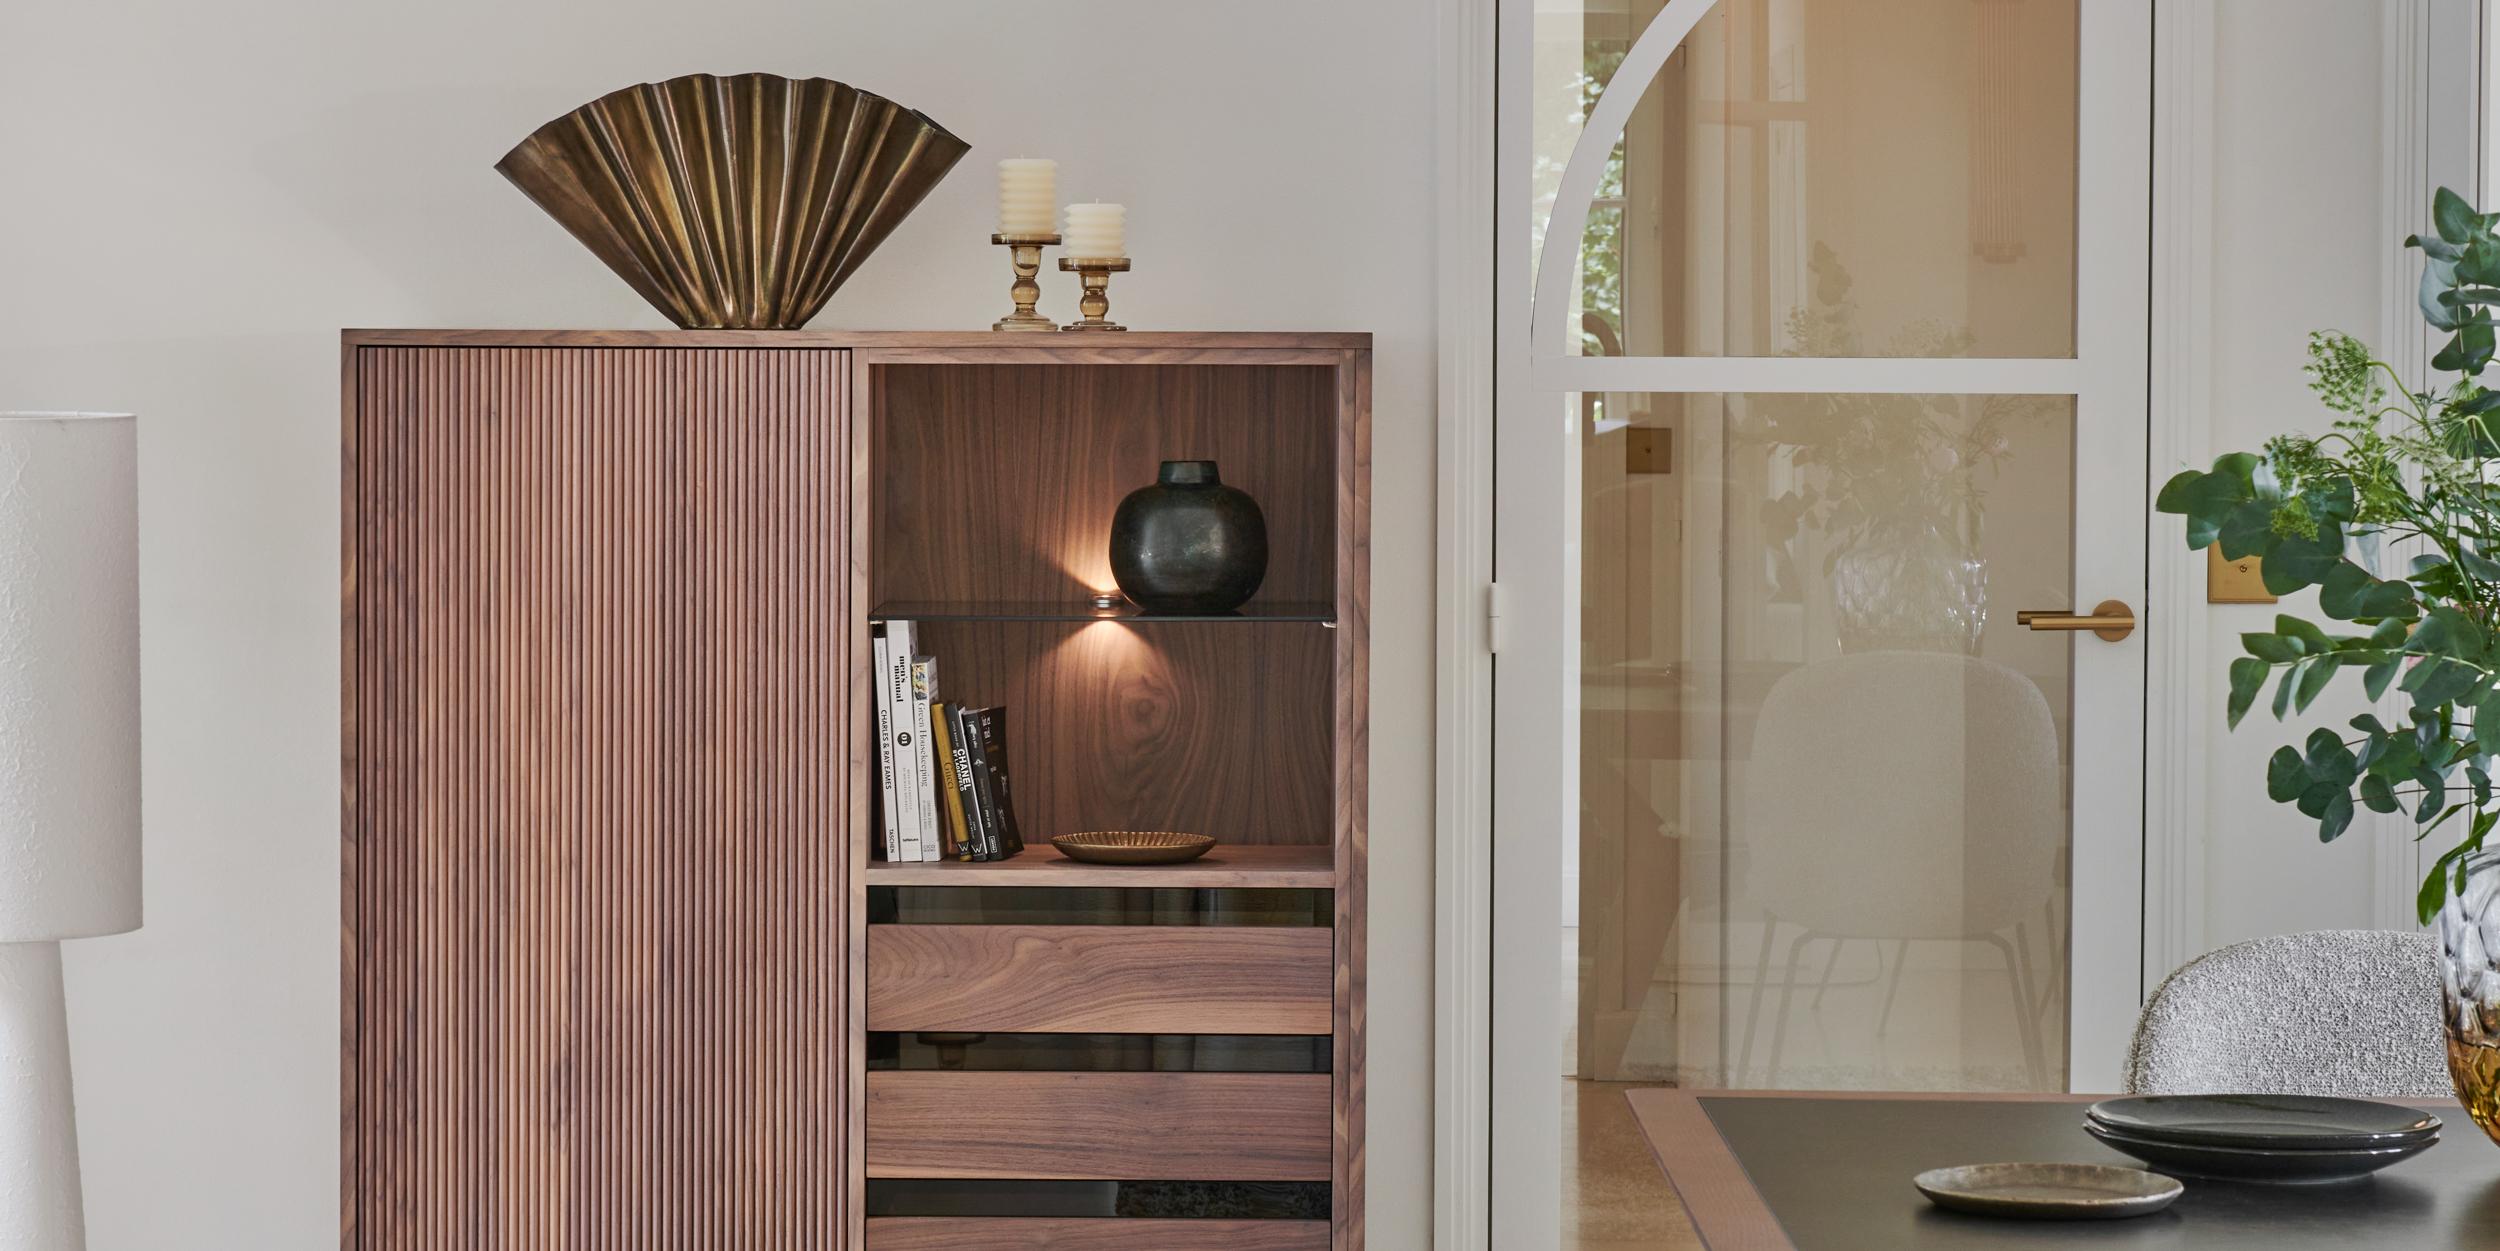 This cupboard belongs to our brand new collection CANNES and is designed by Christophe Lecomte, a French designer located on the French Atlantic shore. 
Christophe graduated from the notorious BOULLE school in 1990 and began his career in